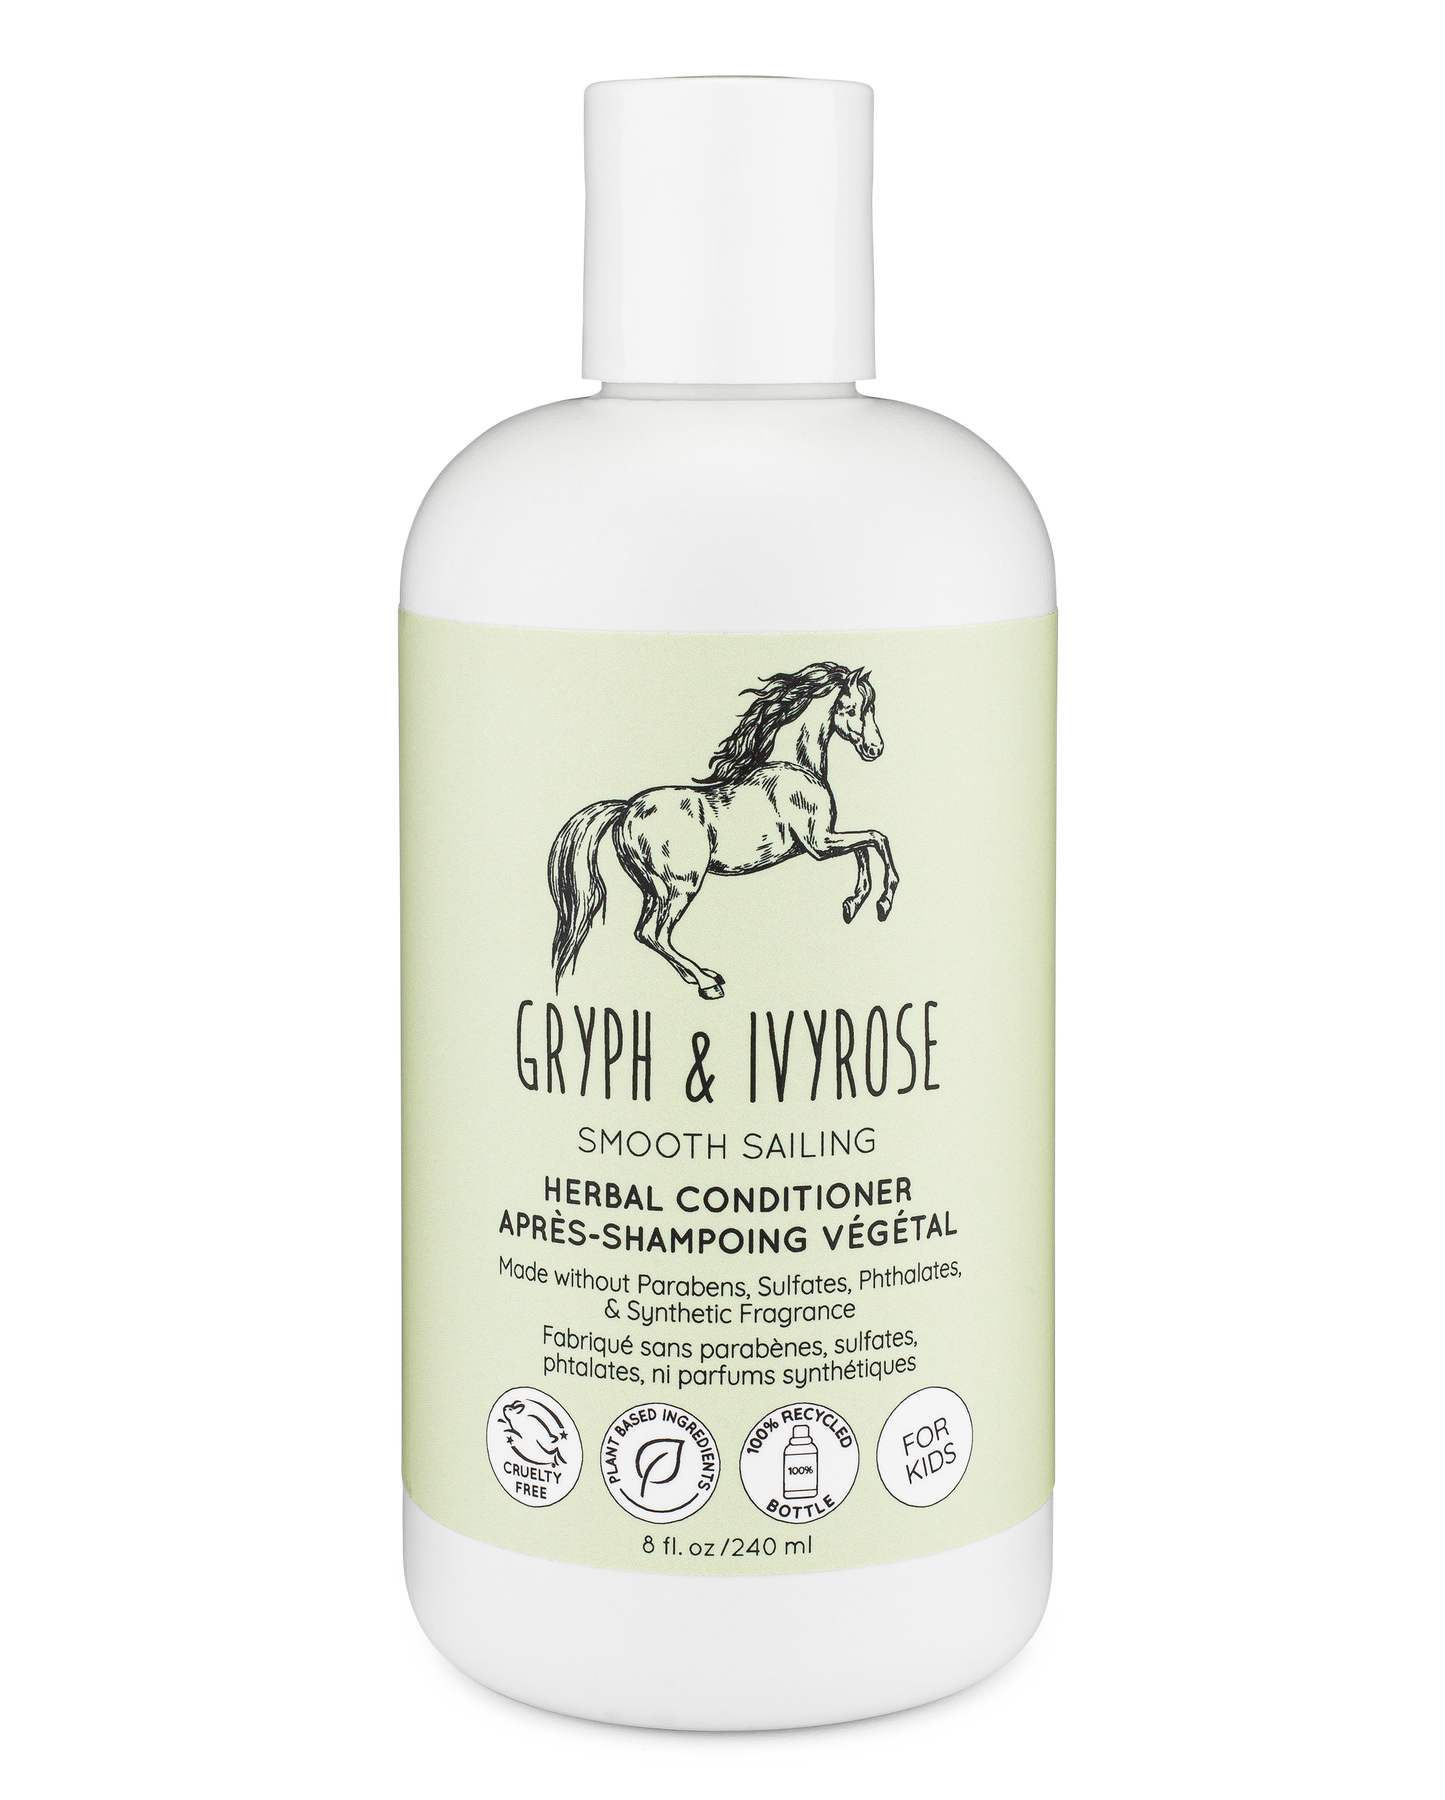 Smooth Sailing Herbal Conditioner